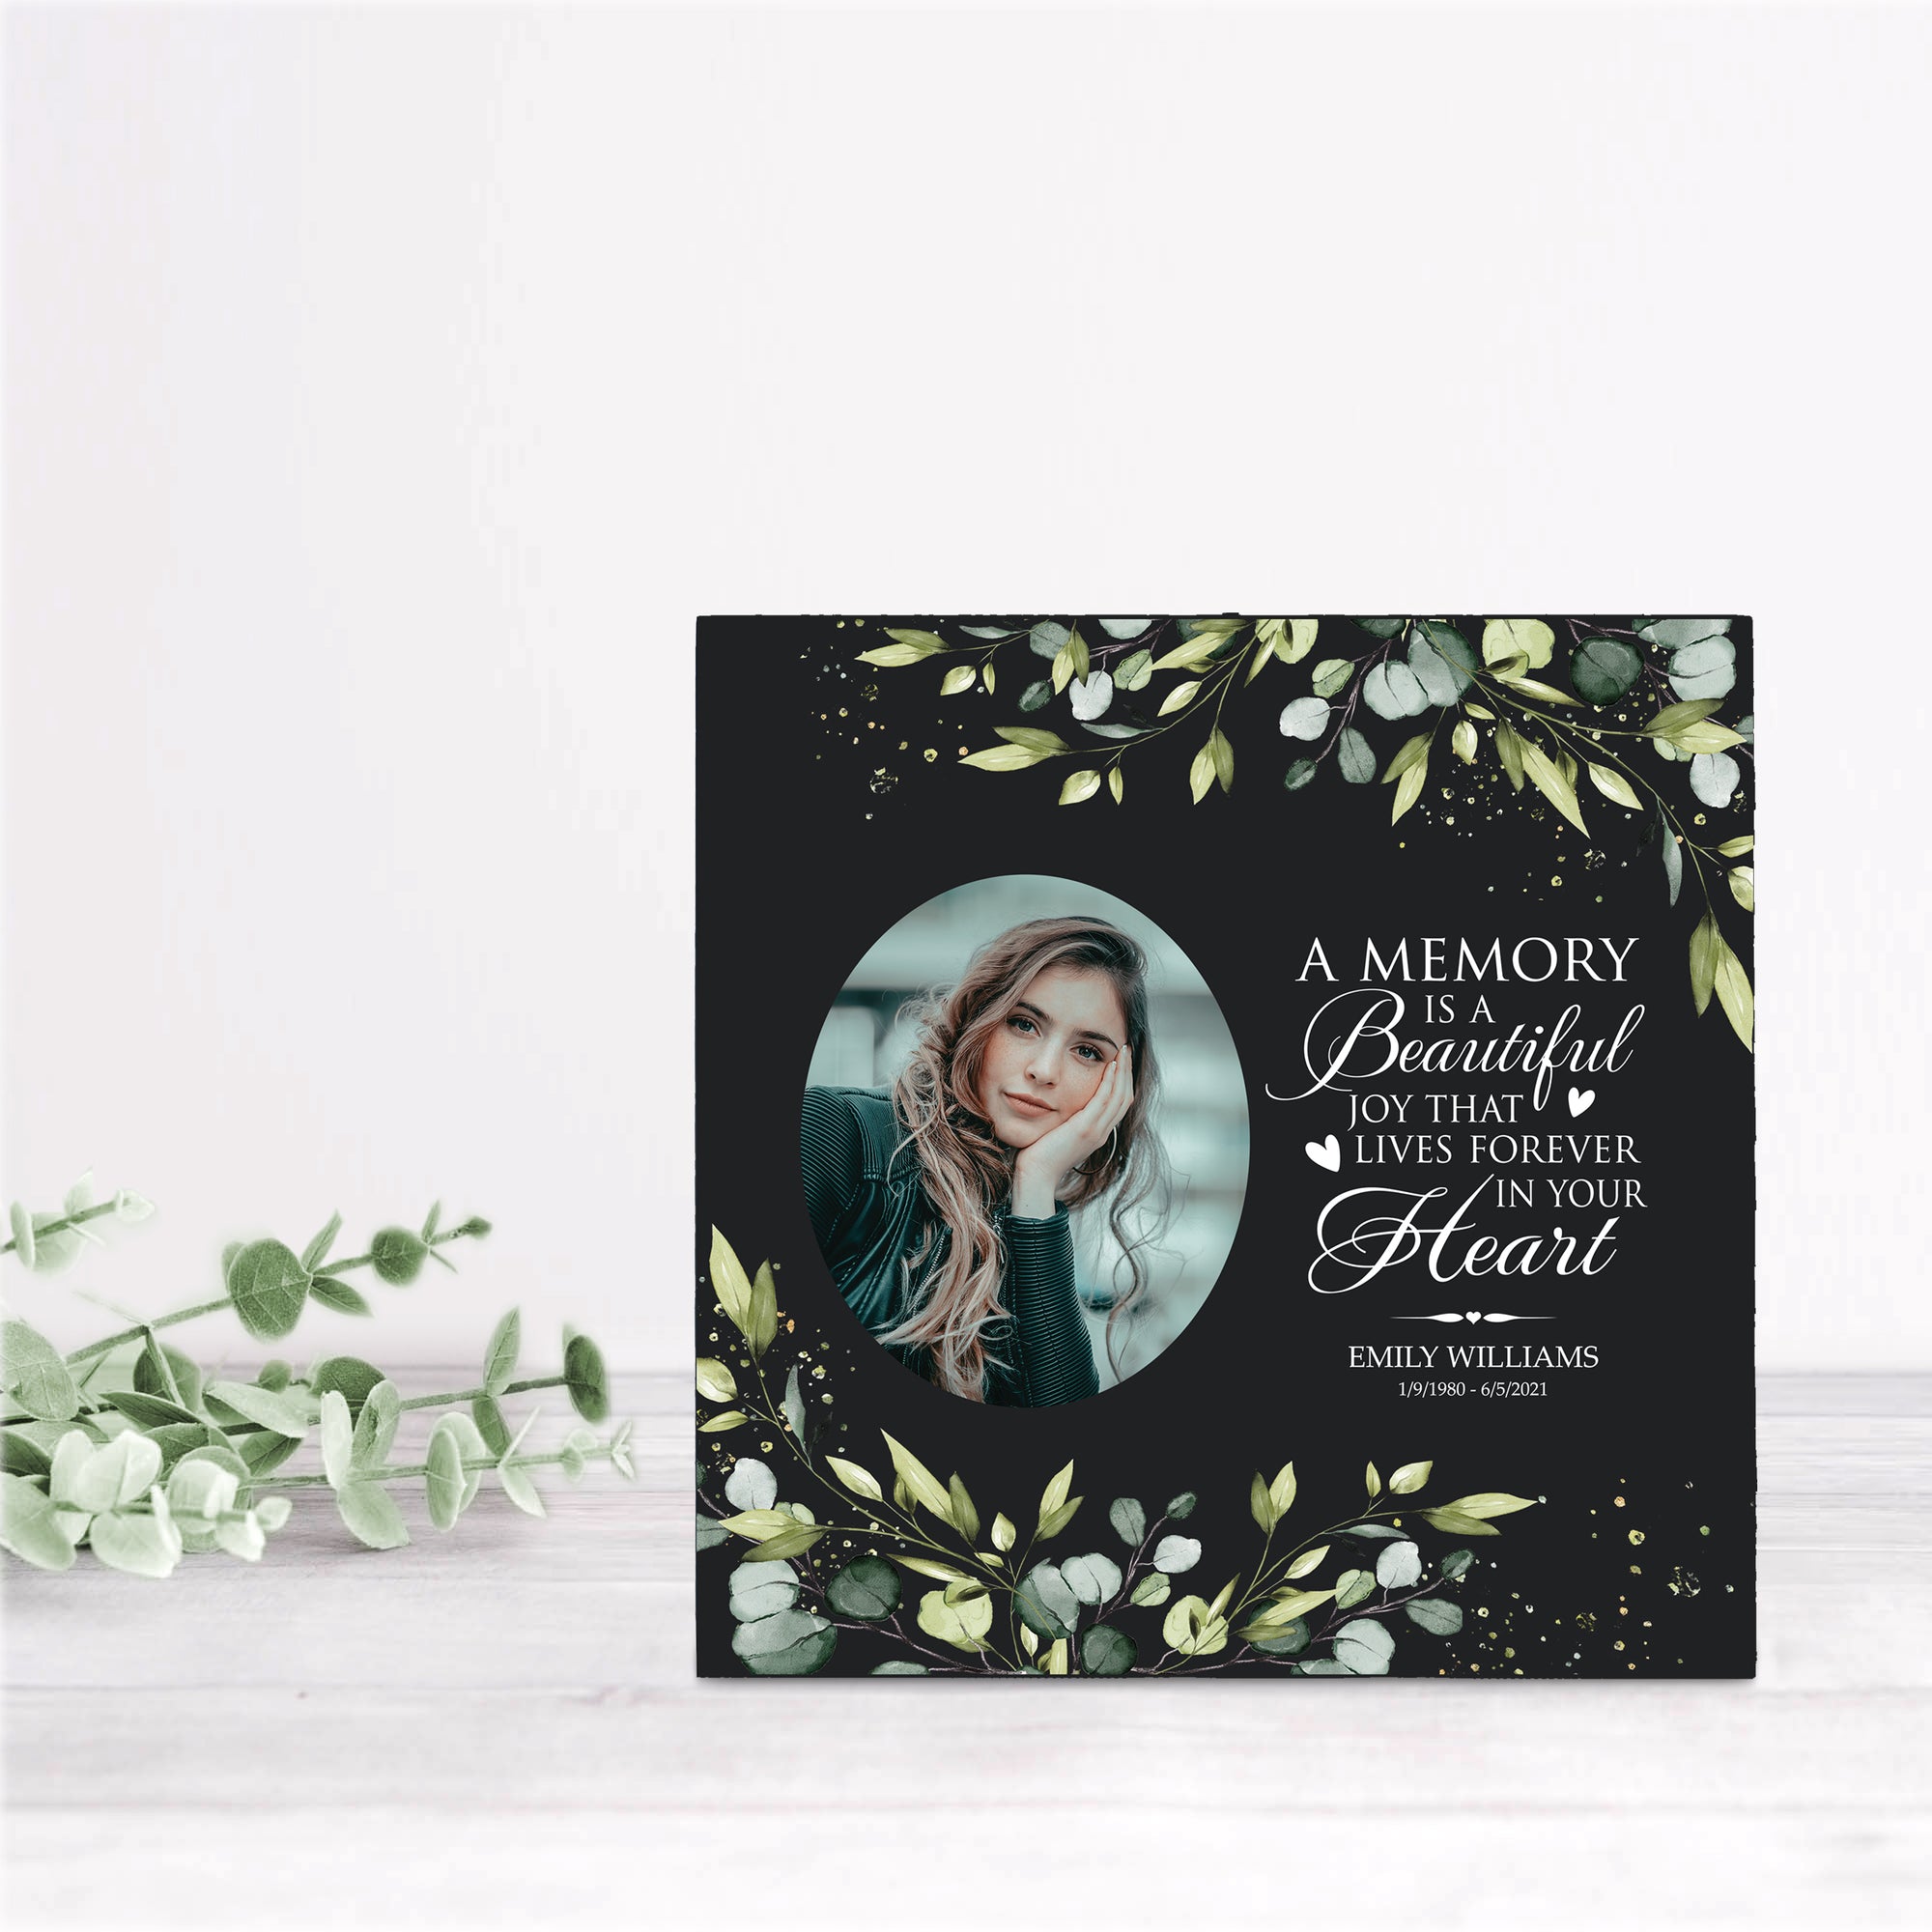 Timeless Human Memorial Shadow Box Photo Urn in Black - A Memory Is A Beautiful Joy